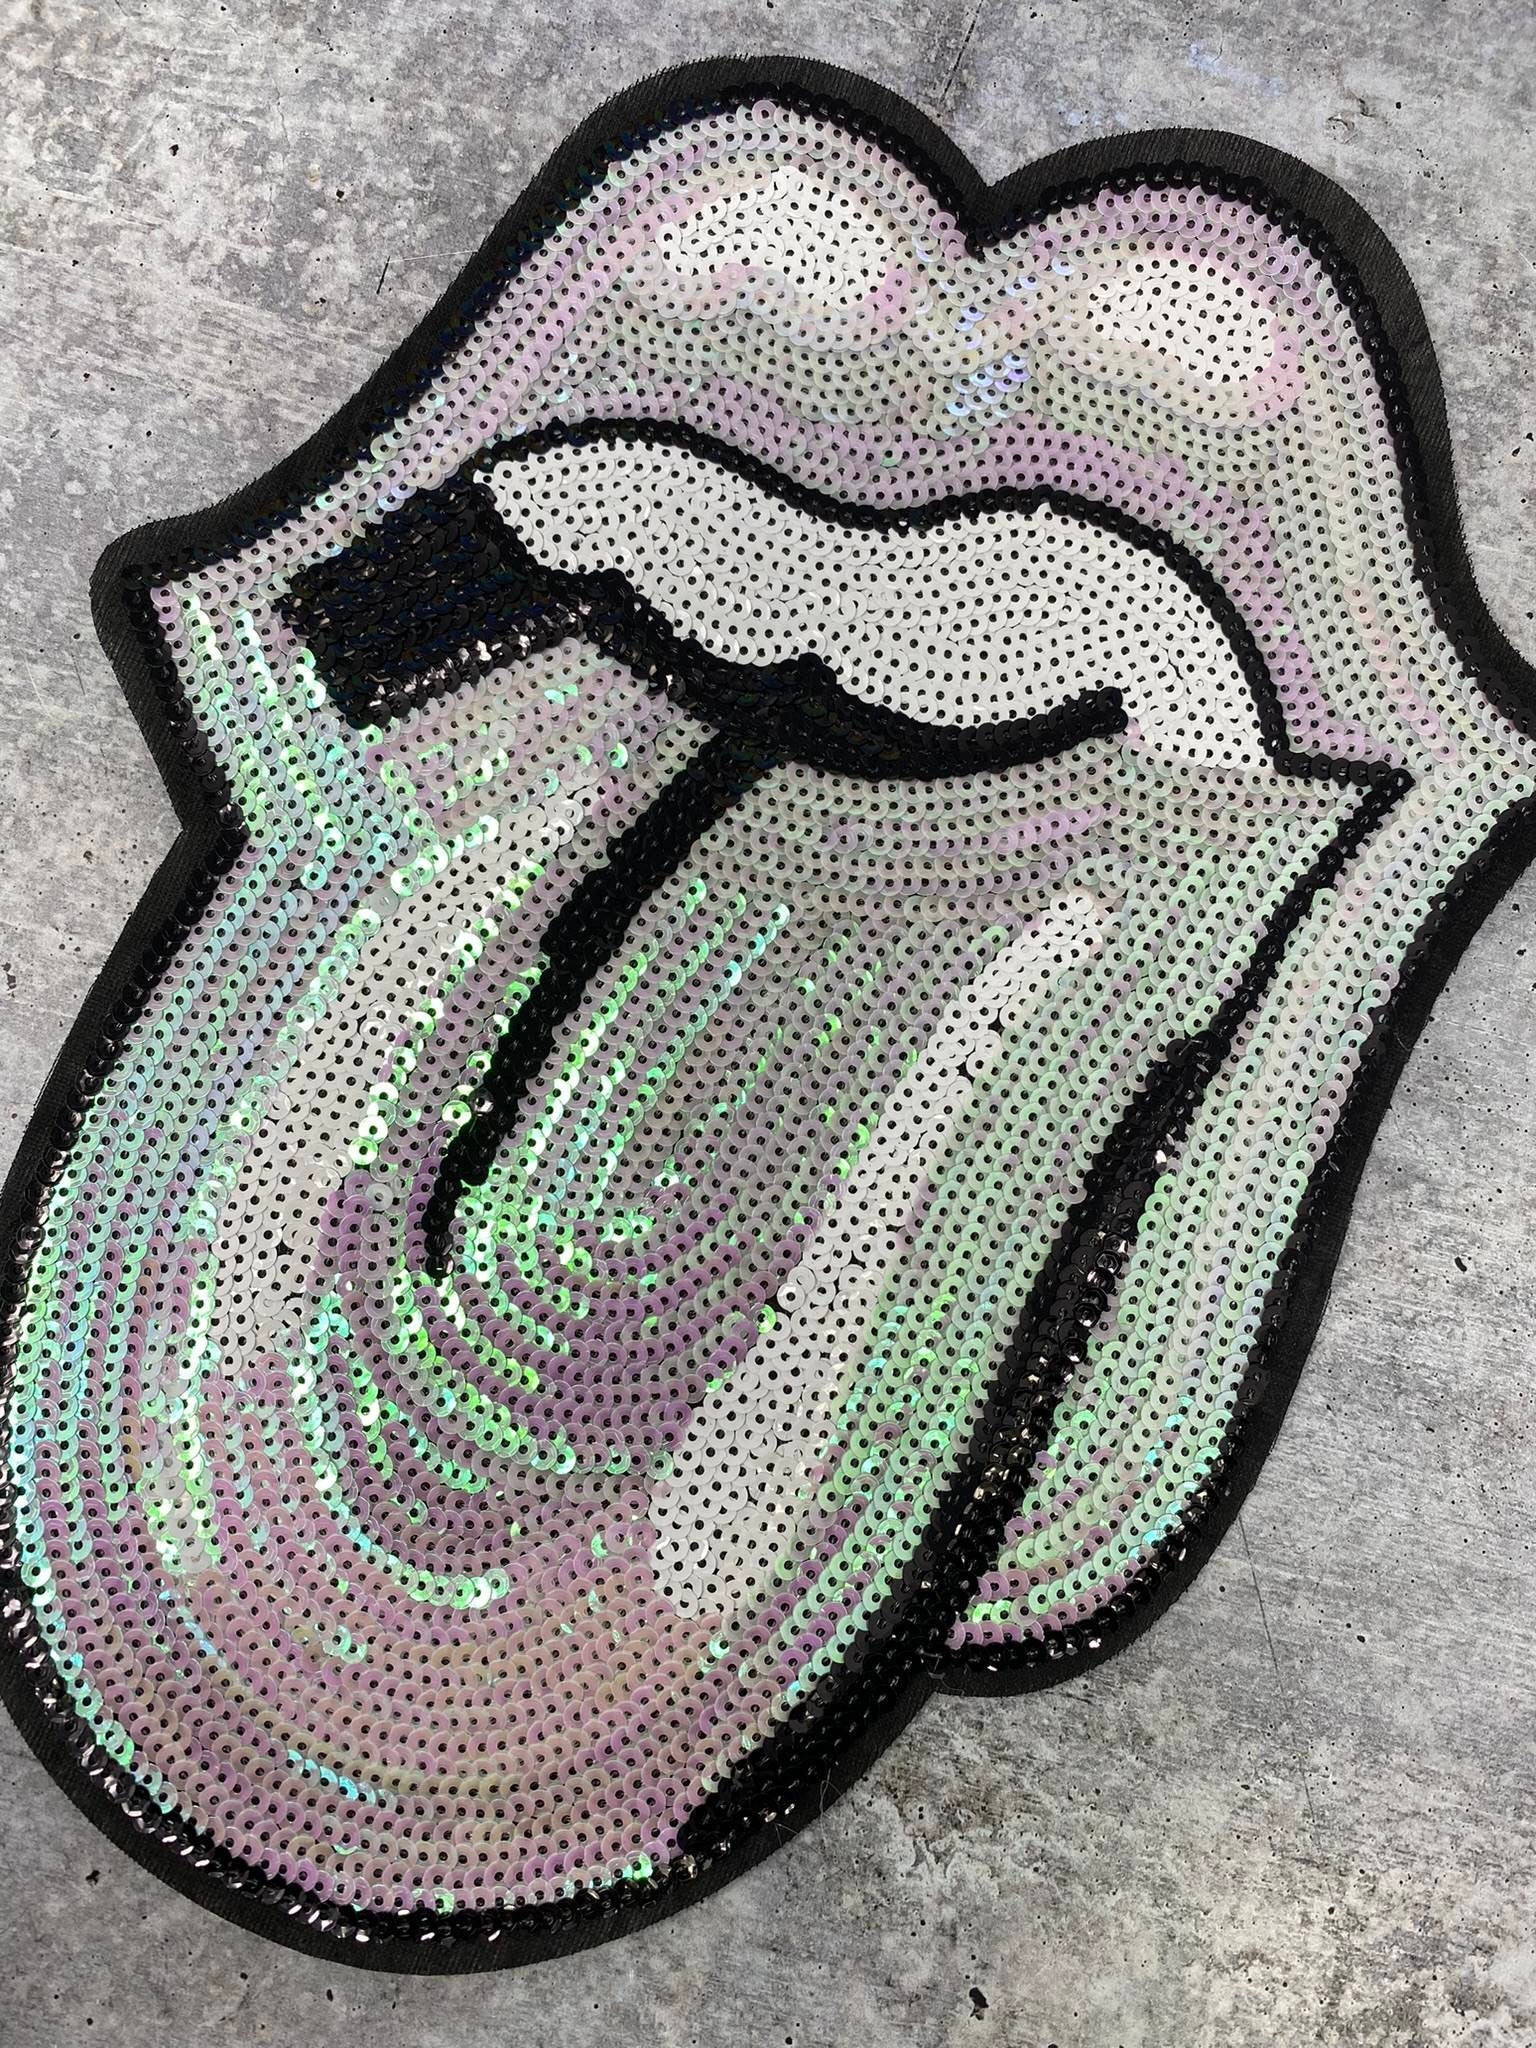 Sequins "Light Purple Irredescent" Lips & Tongue Kiss Patch, Iron-on, Size 13" x 9", LARGE Bling Patch for Denim Jacket, Shirts, Hoodies